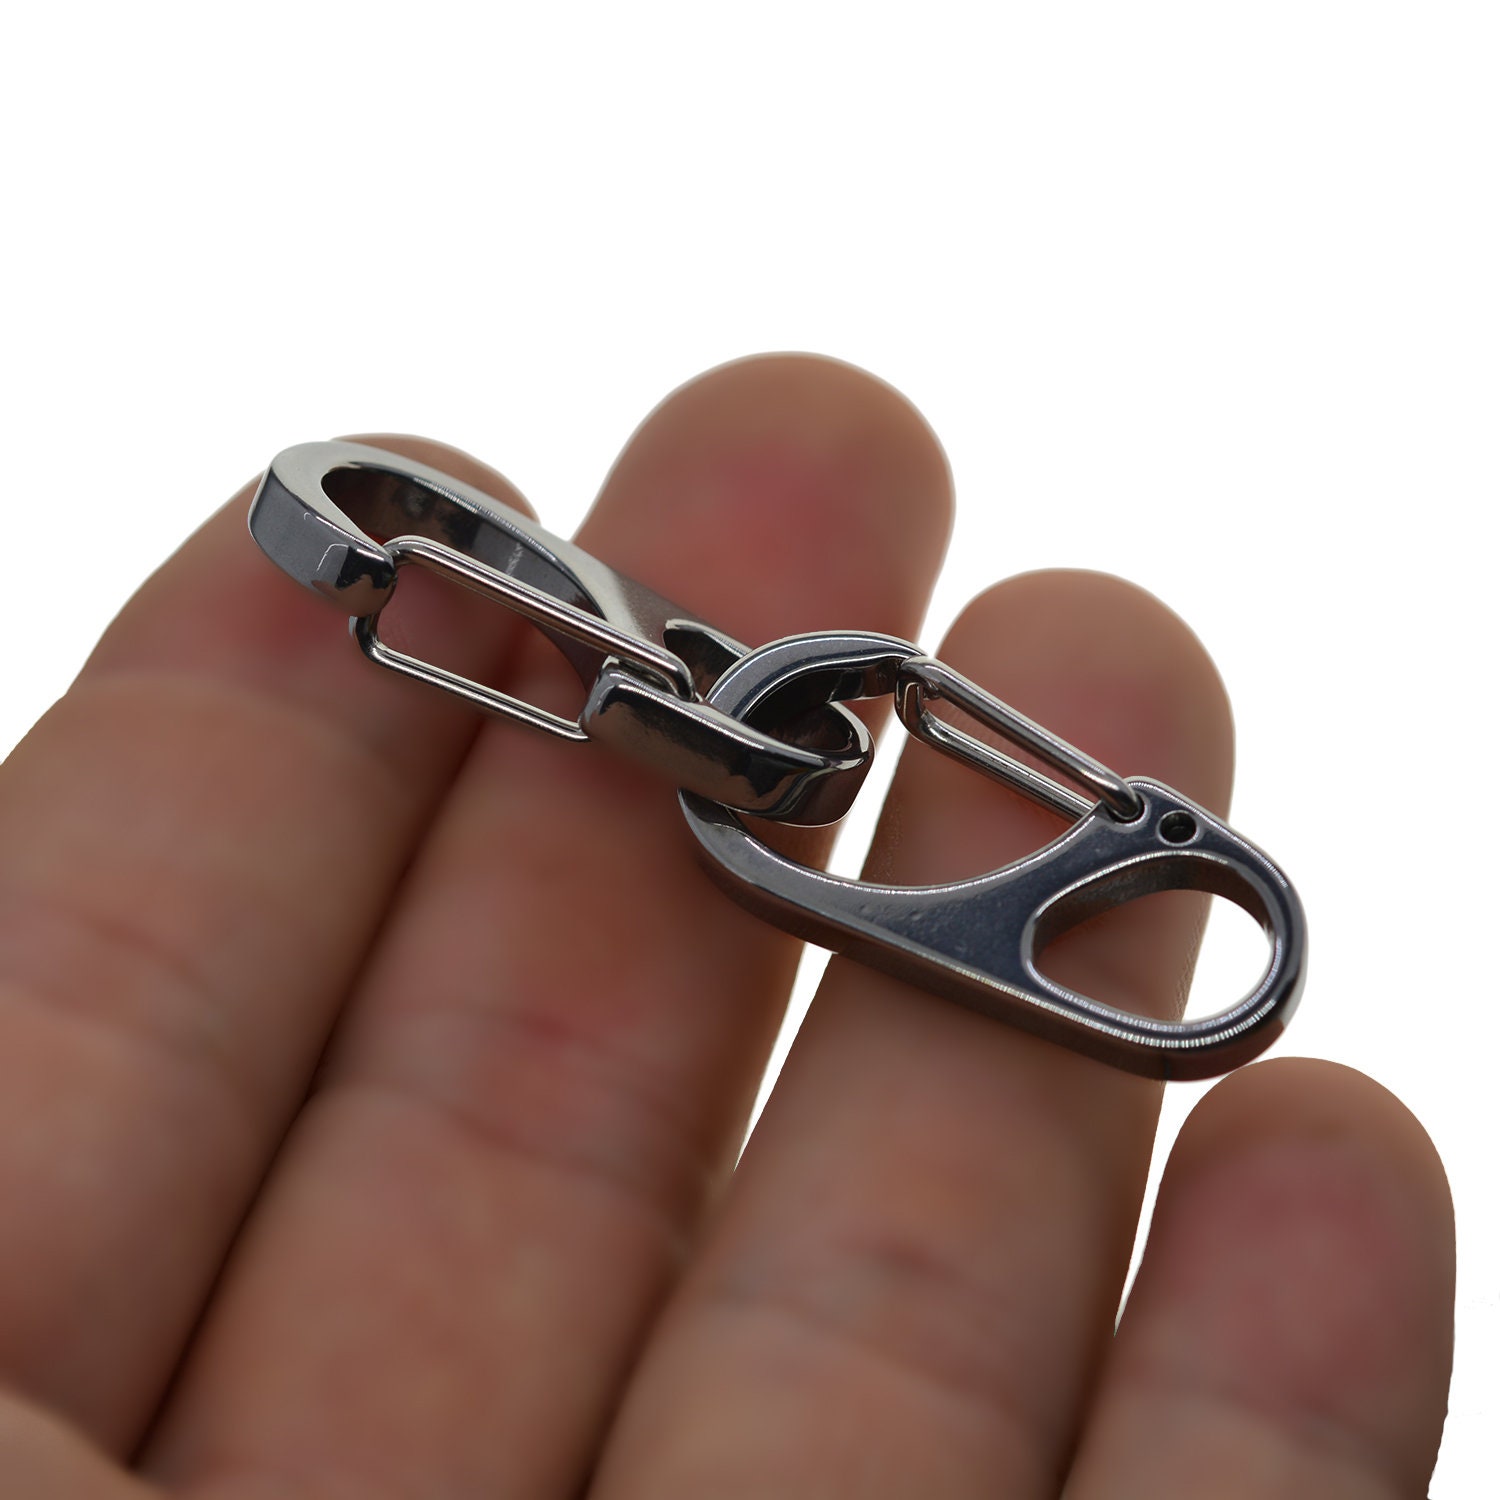 Small Mini Super Strong Fine Ti Solid Stainless Steel Spring Snap Hook  Quick Release S Carabiner Paracord Clasp Diving EDC Climb Biker DIY -   Finland